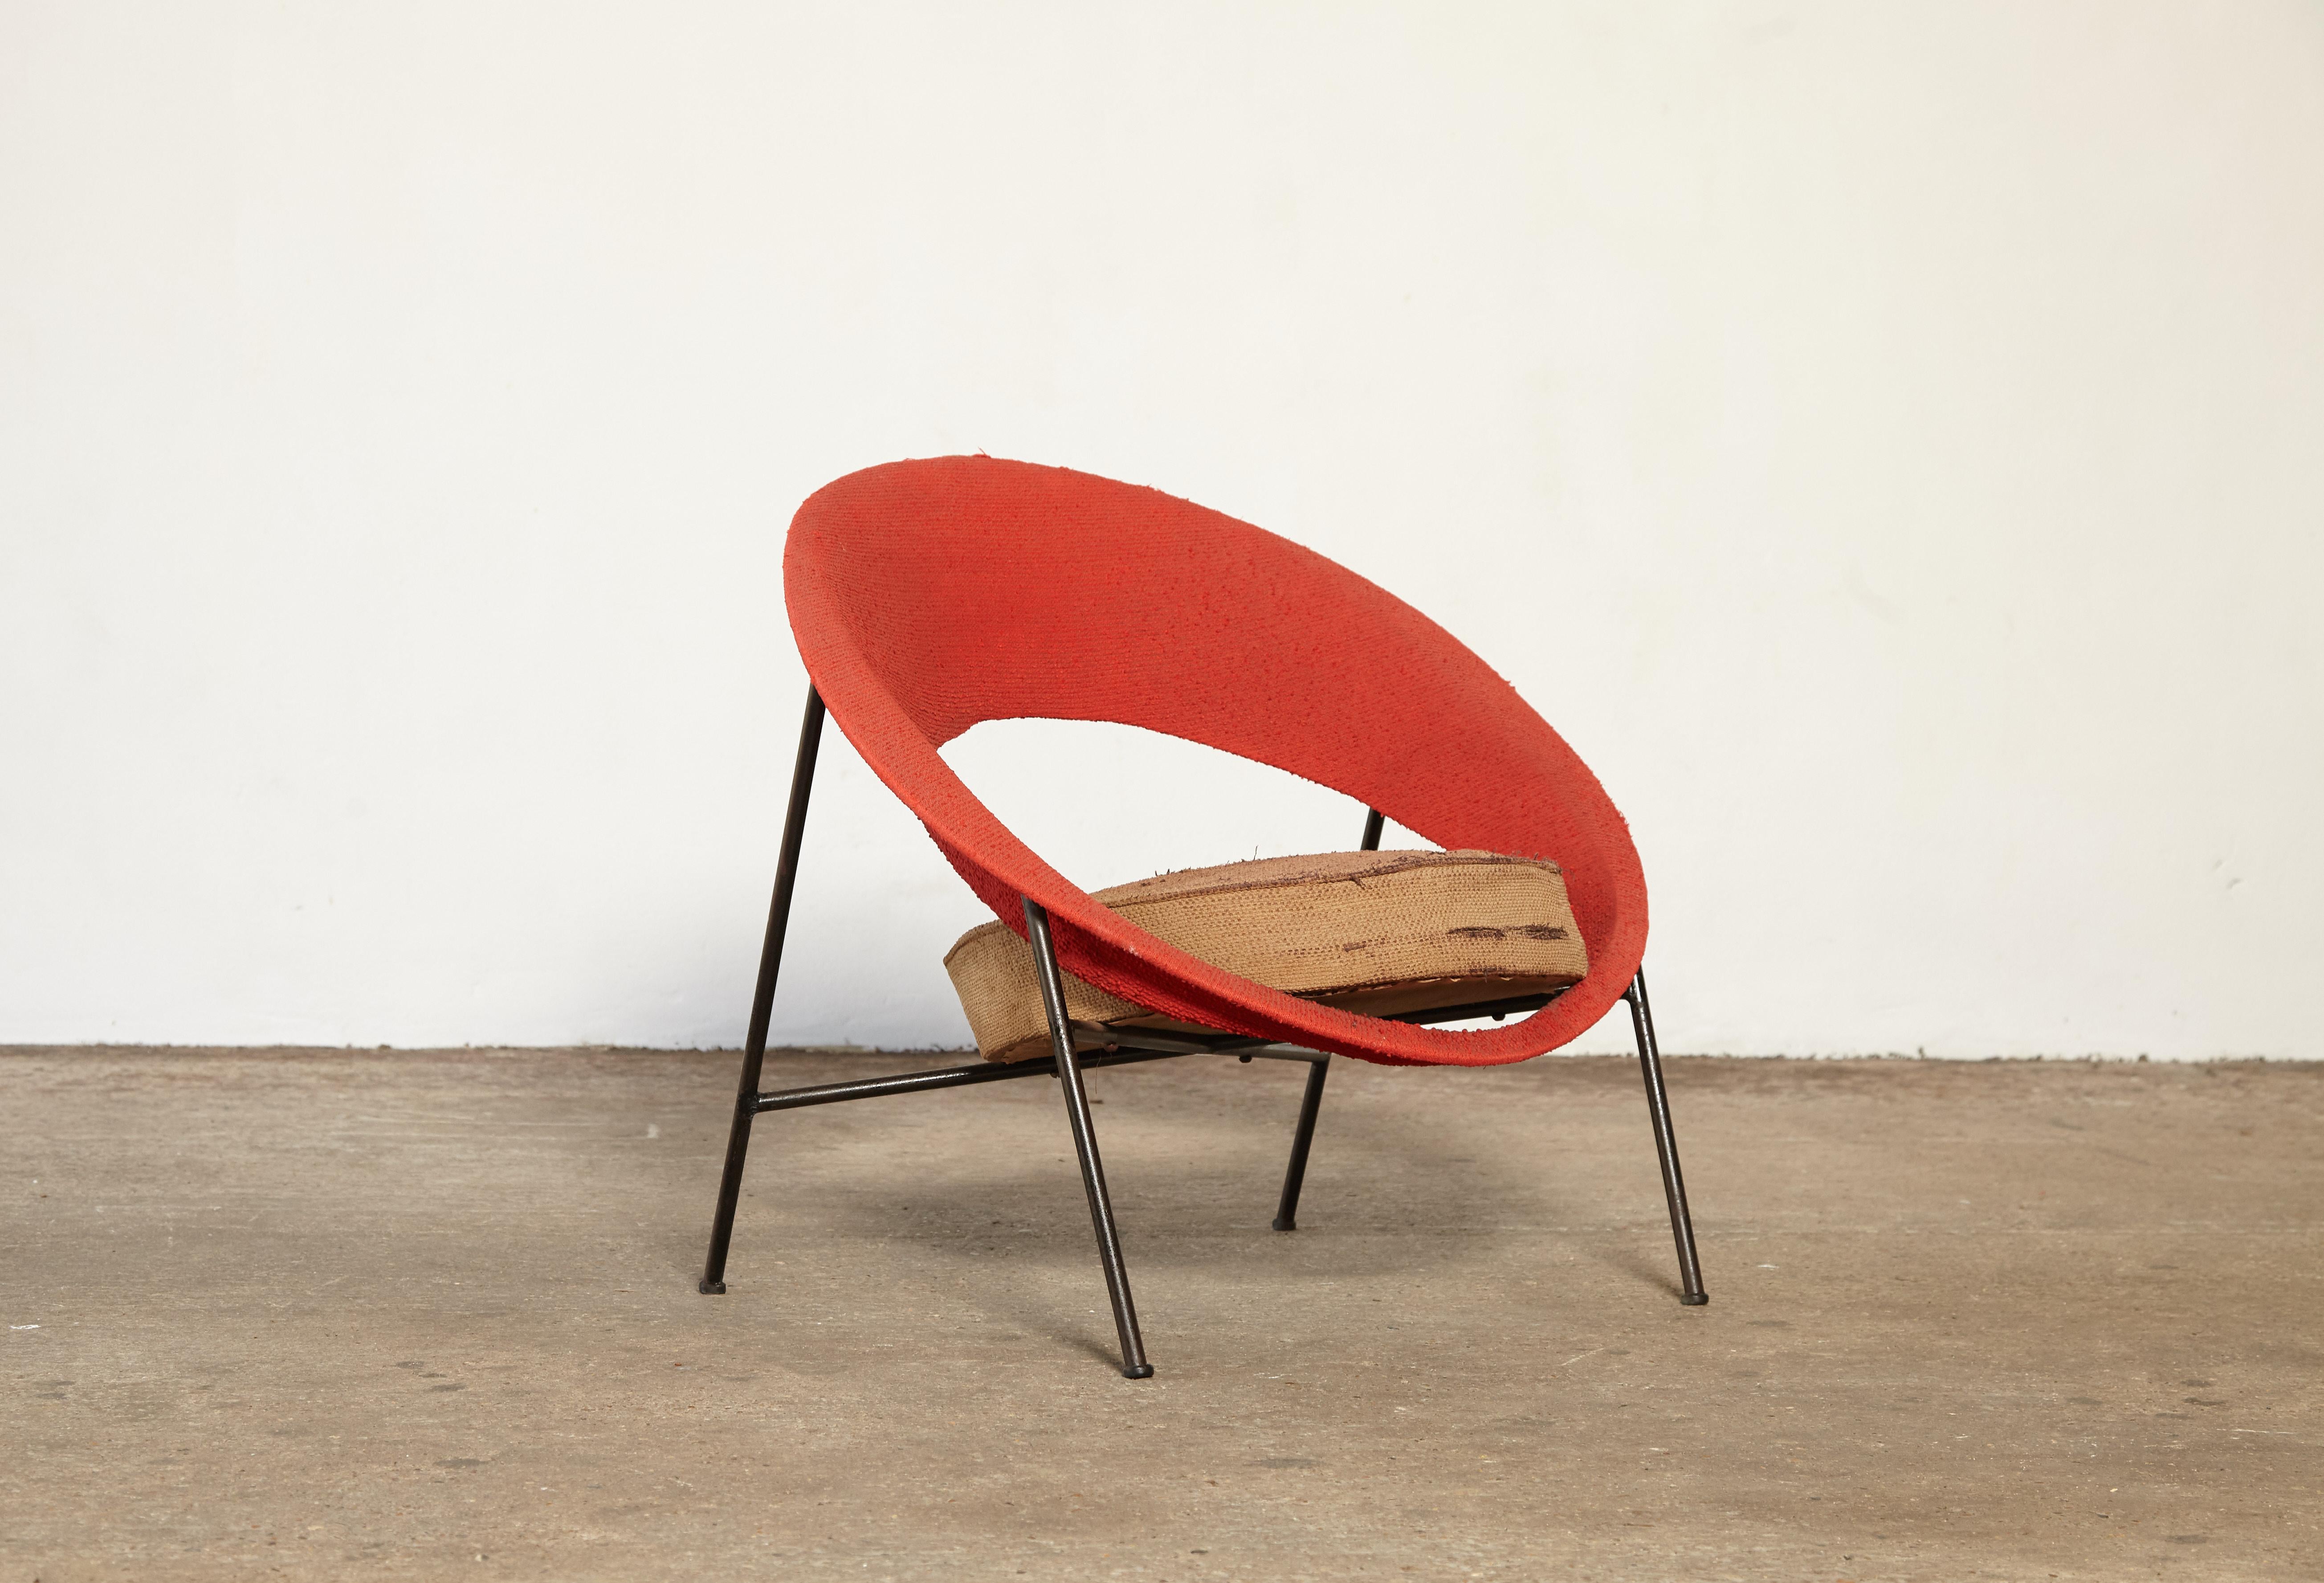 A very rare early Saturne (Saturn) armchair, in original condition, designed by Genevieve Dangles and Christian Defrance. Presented in Paris in 1957 at the “Arts Ménagers” Design Show and produced by Burov, France, 1950s.

The chair needs